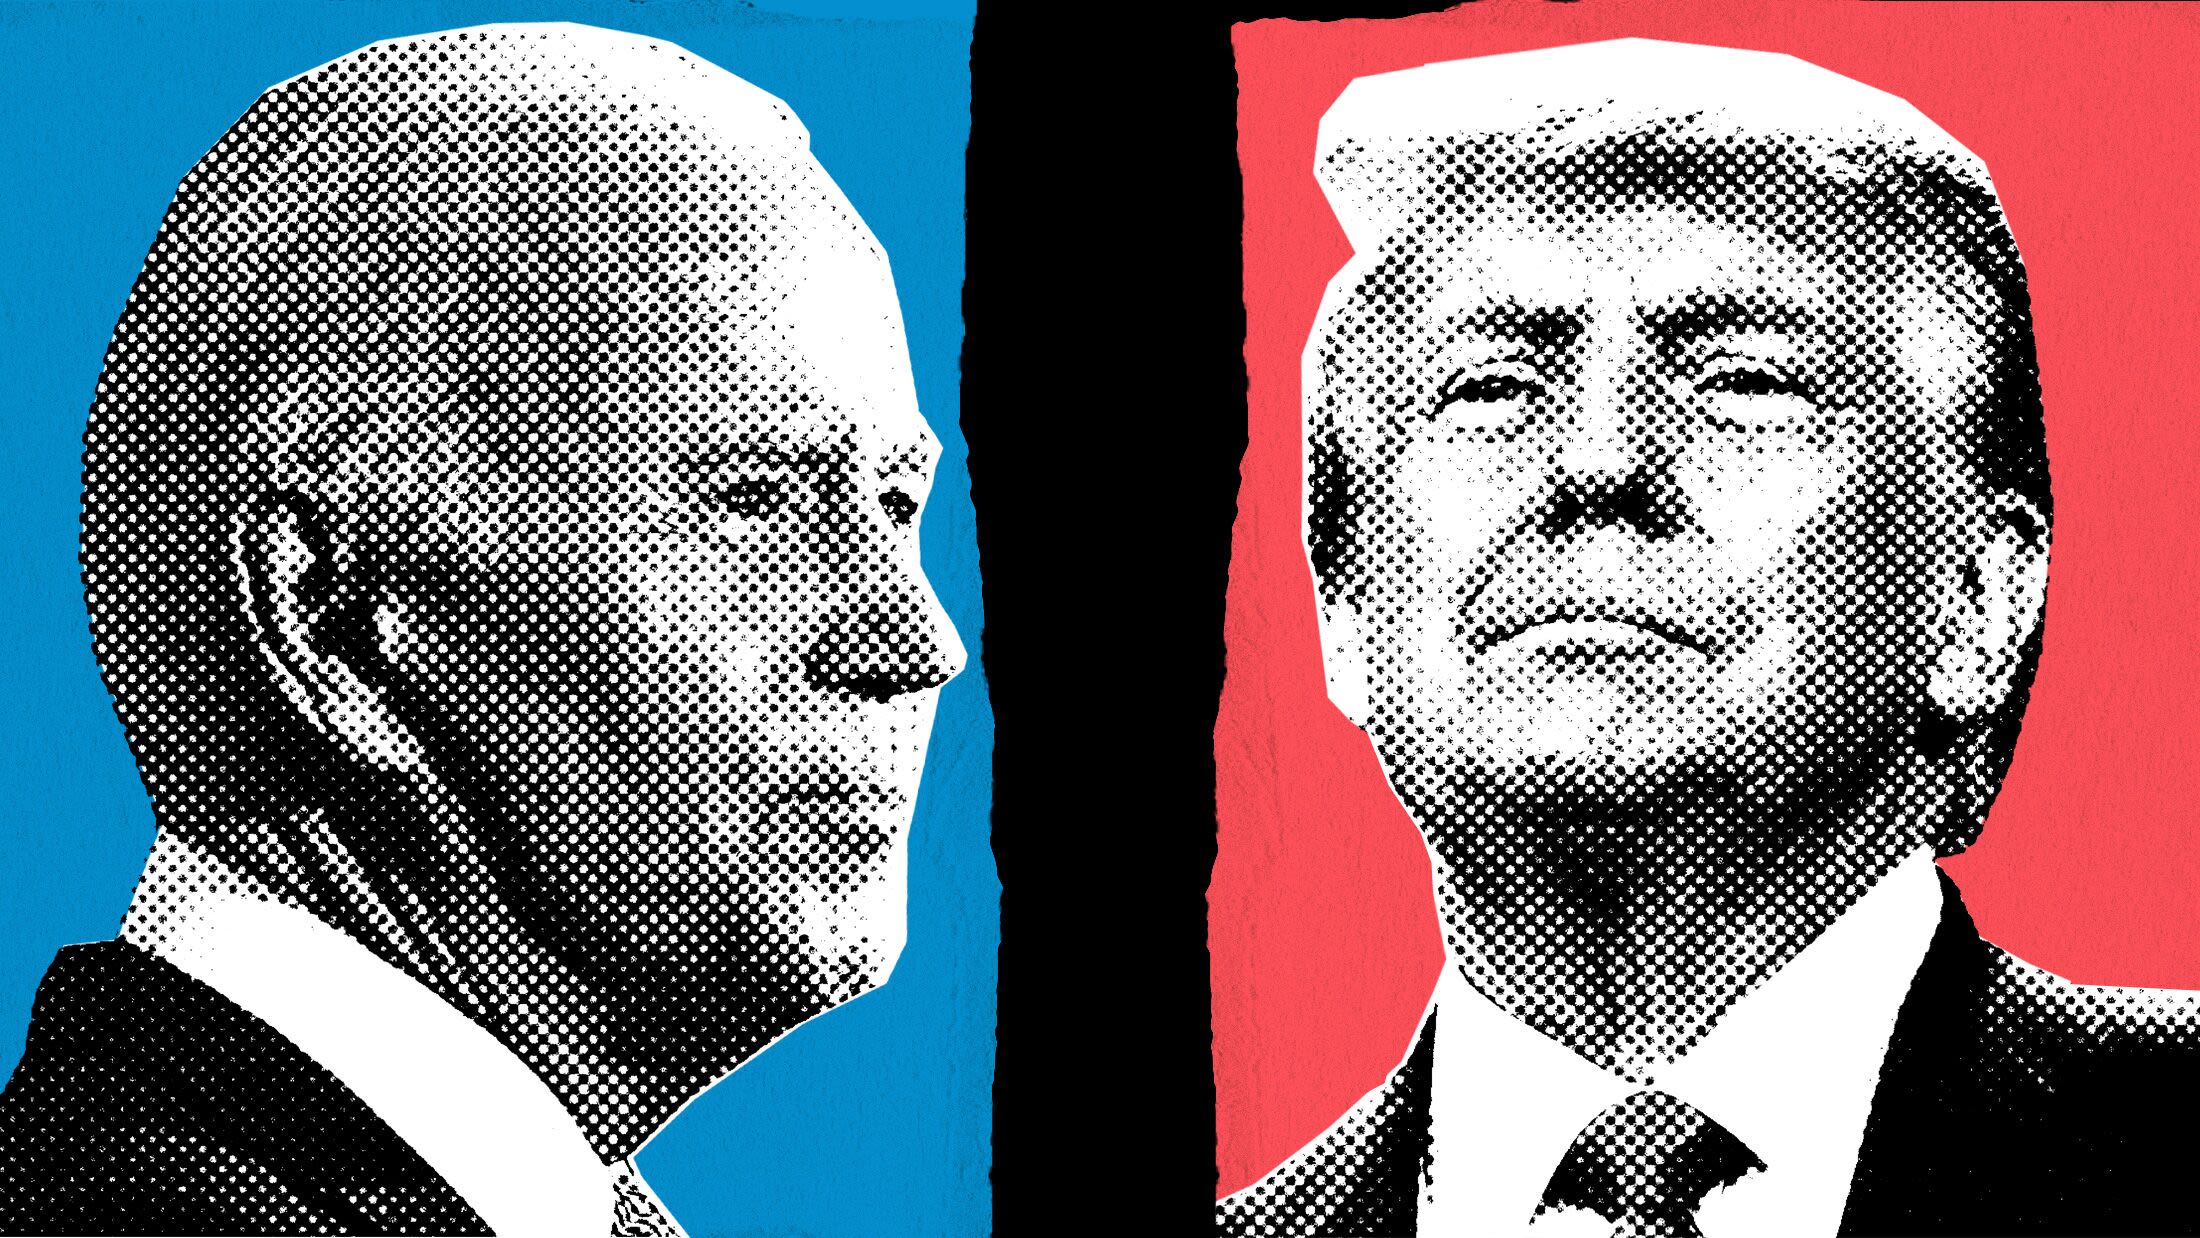 Voters Prefer Trump Over Biden on Economy. This Data Shows Why